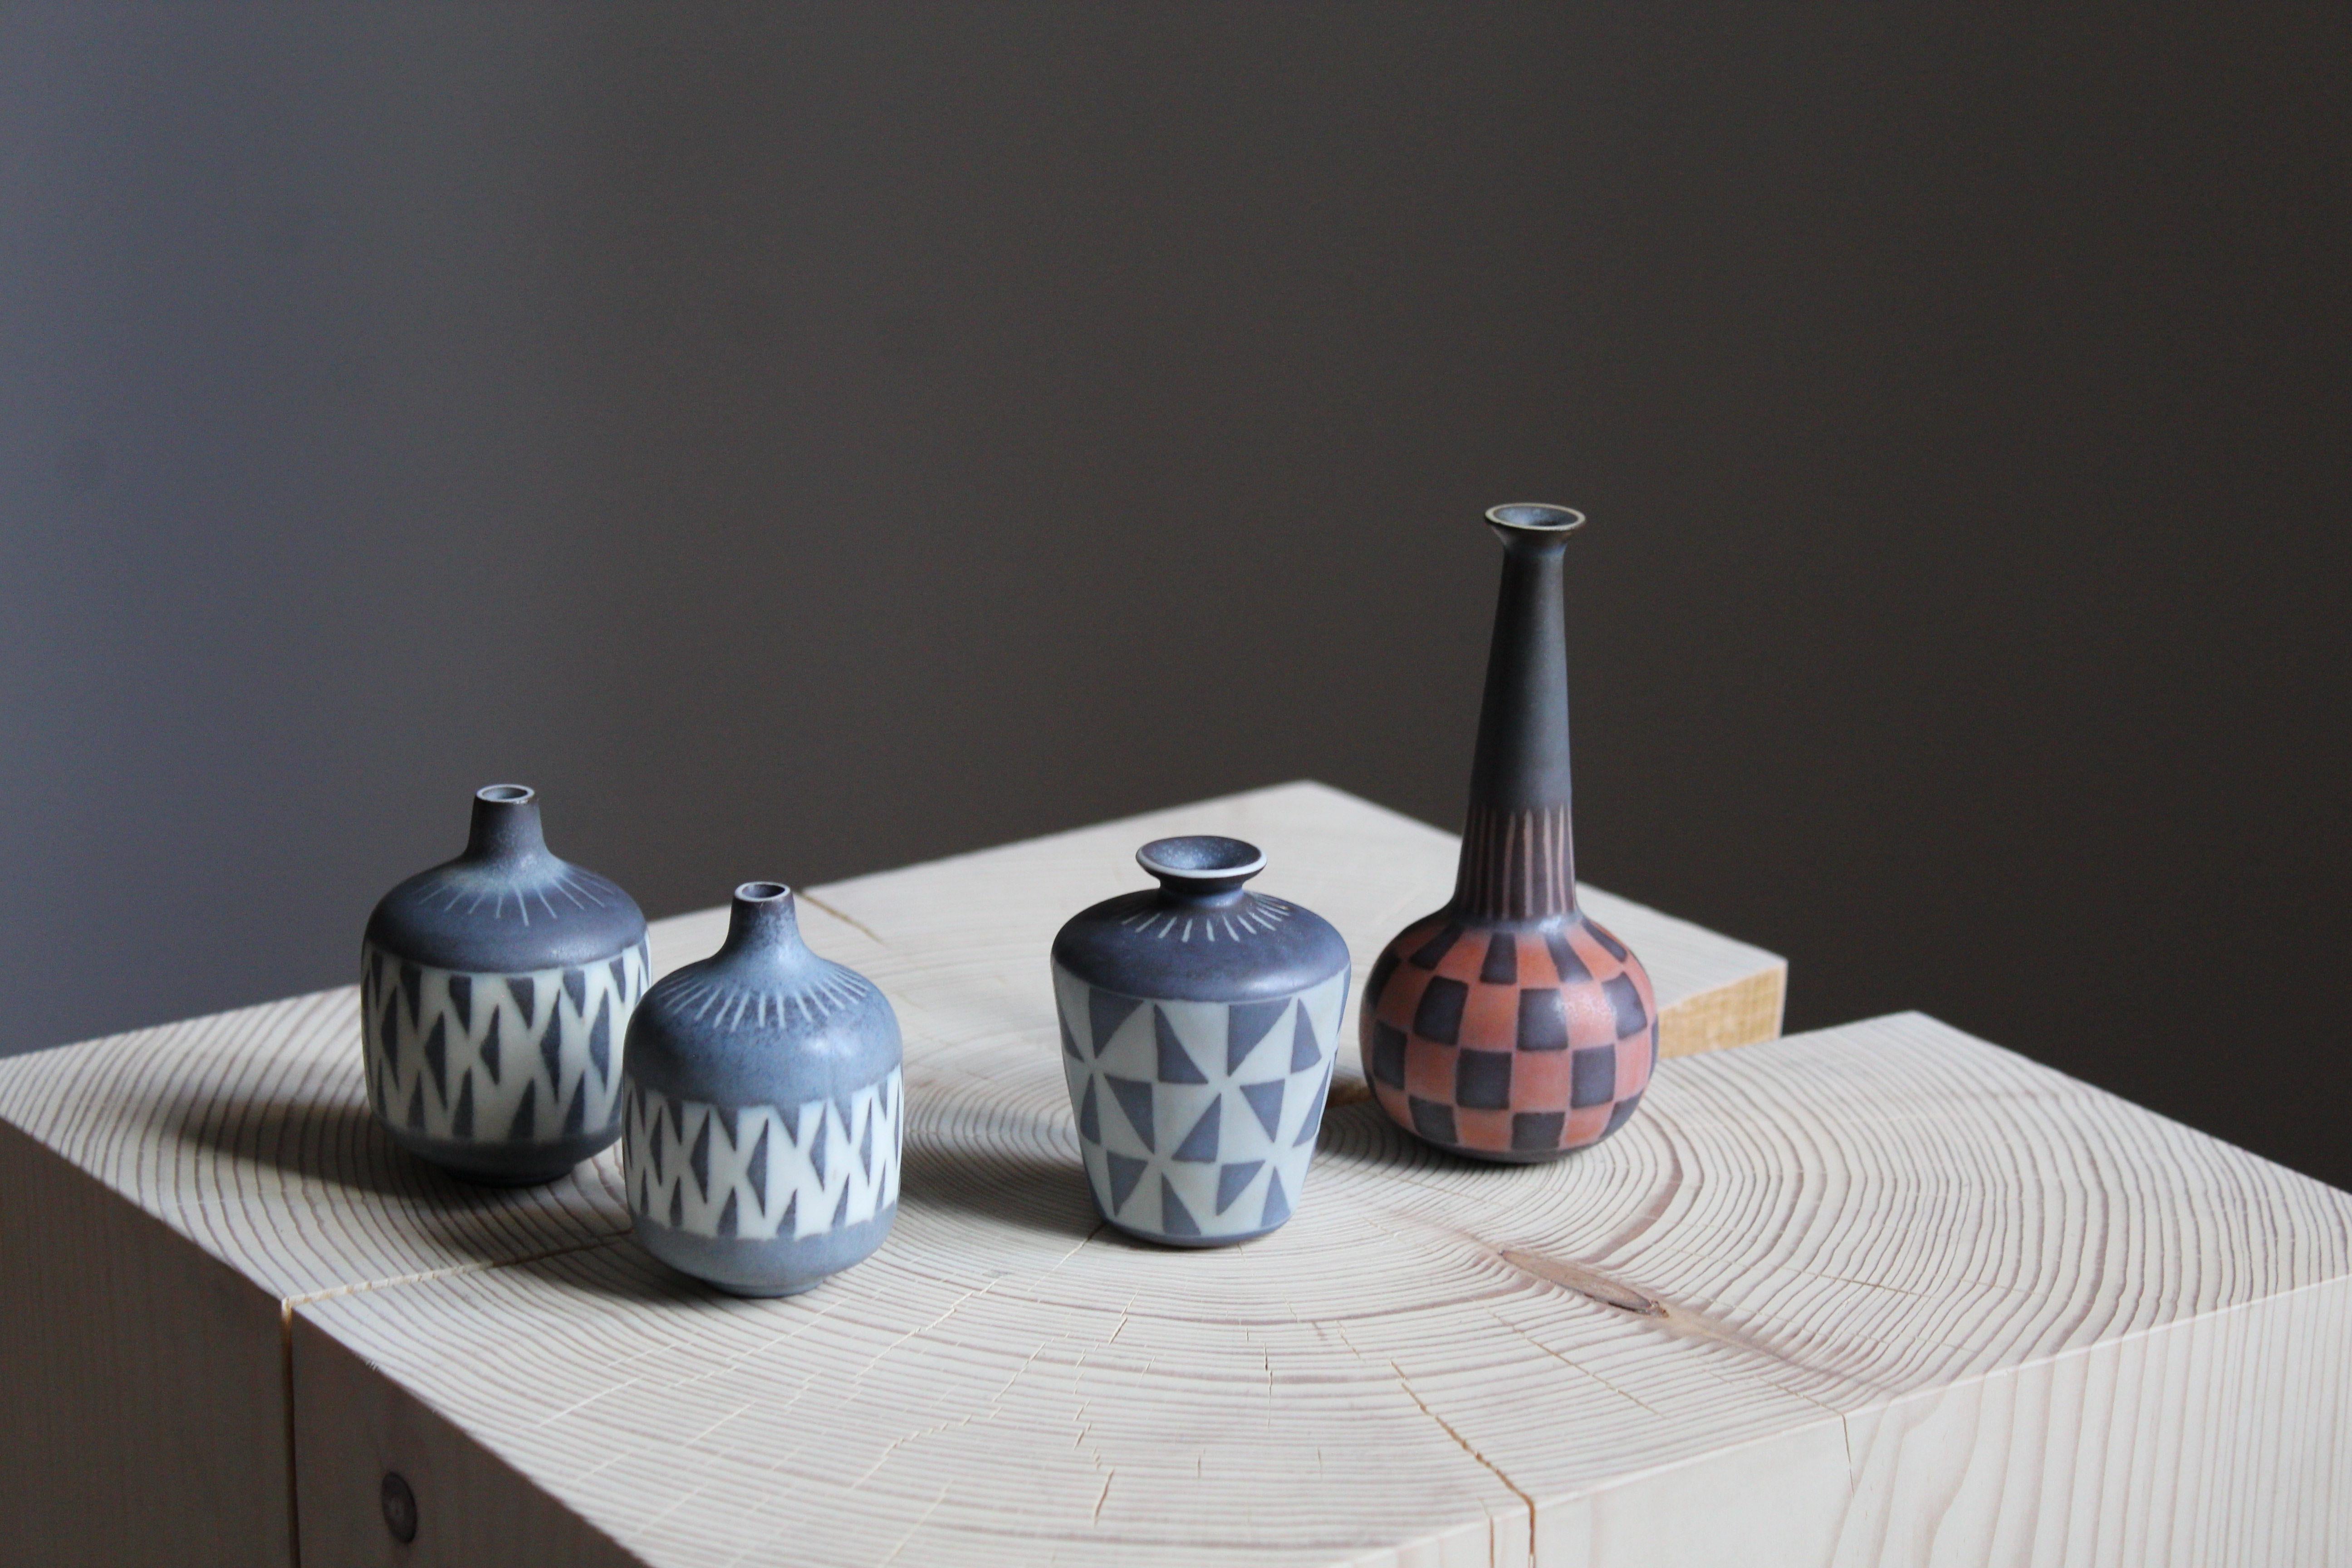 A collection of 4 small vases in stoneware and produced by Rörstrands, Sweden, 1940s. Designed and signed by Gunnar Nylund, (Swedish 1914-1997). All vases with highly artistic hand painted patterns.

Nylund served as artistic director at